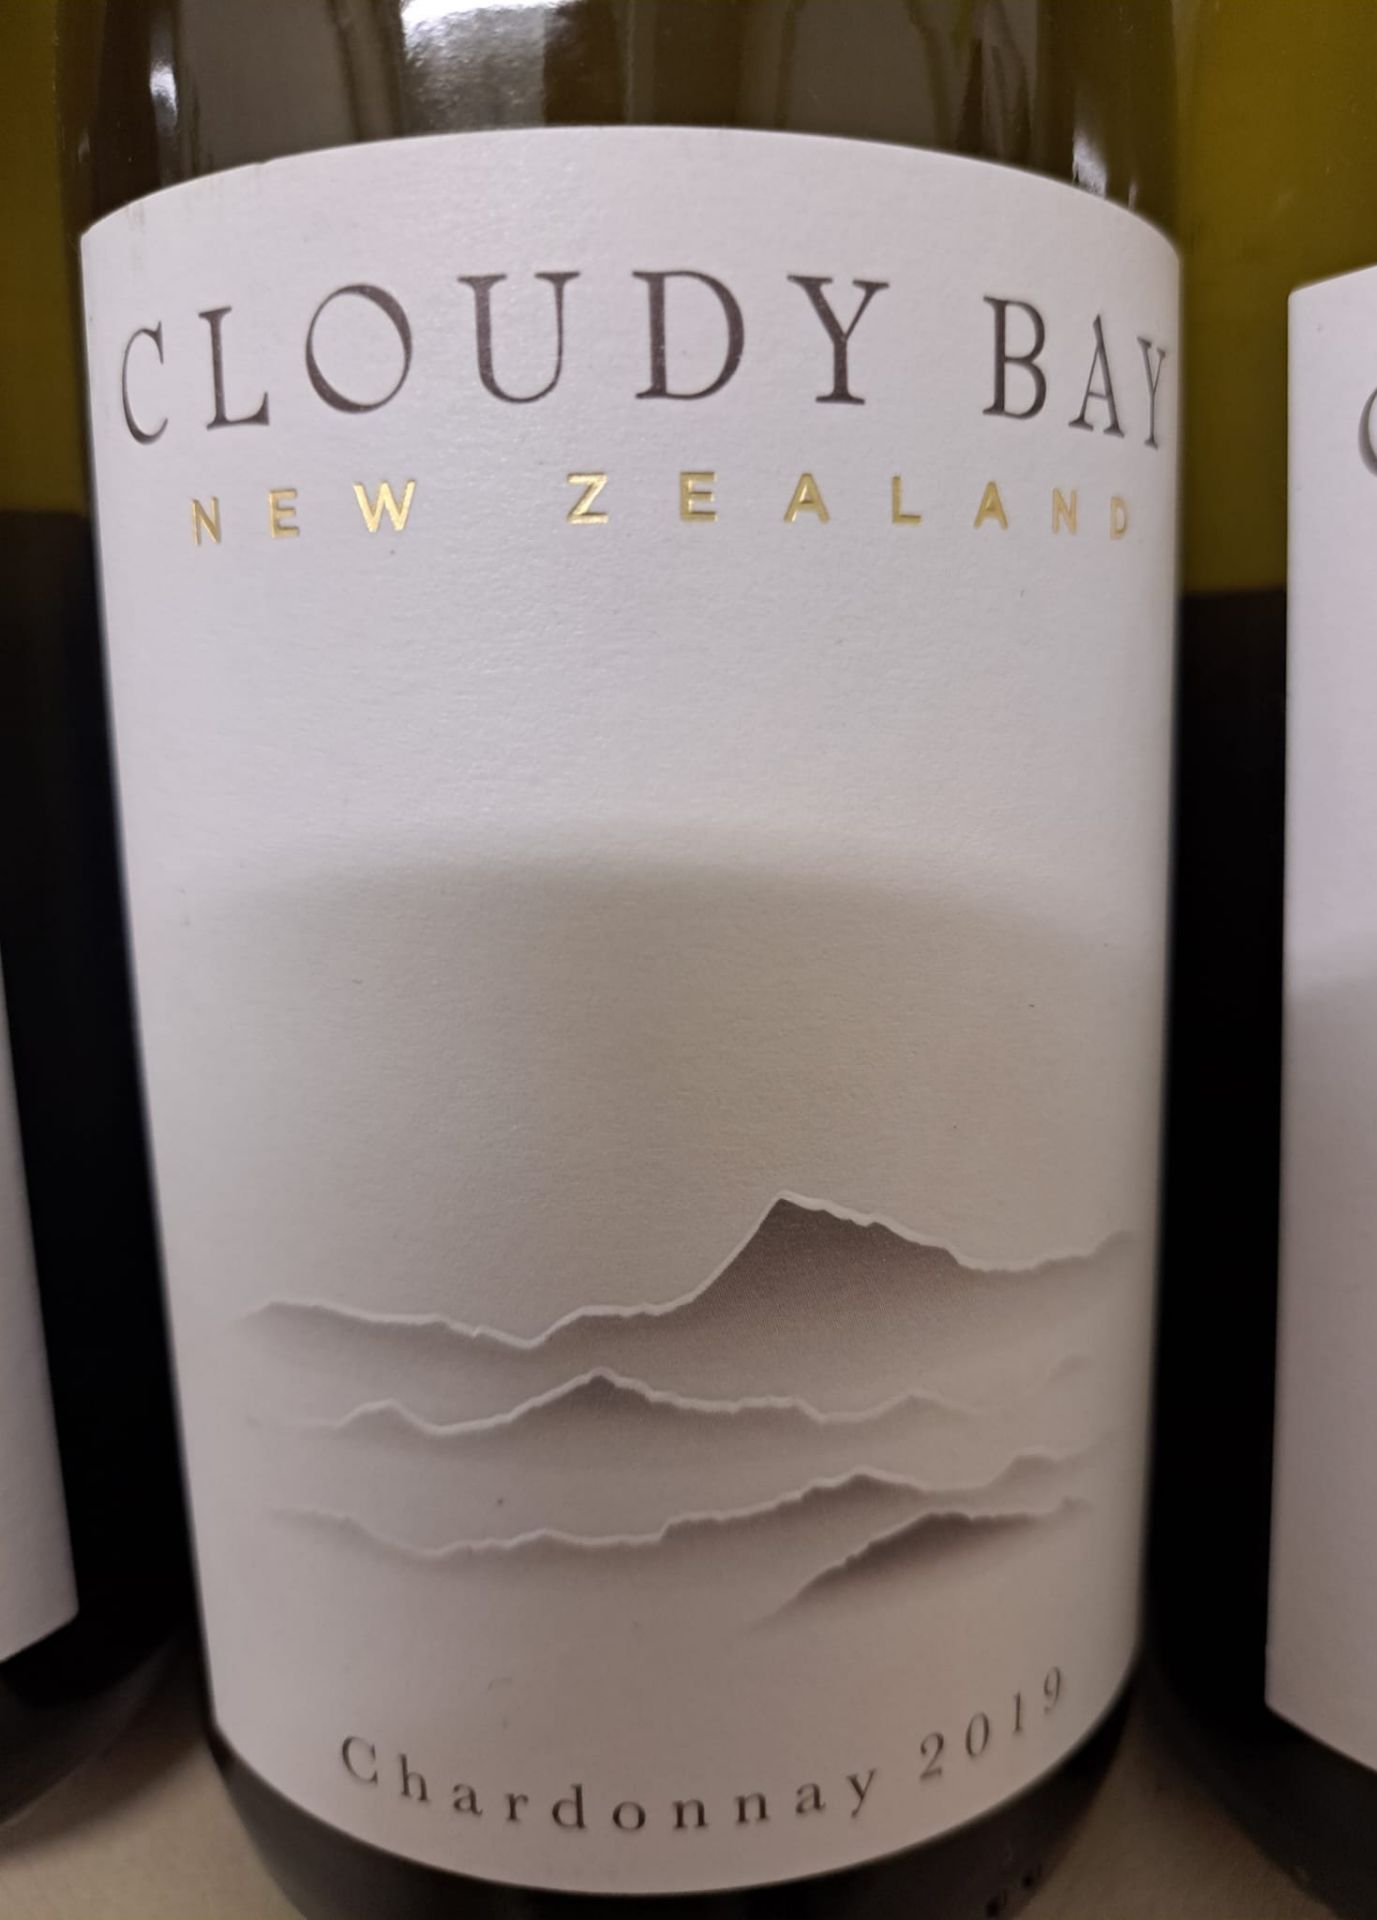 4 x Bottles of 2019 Cloudy Bay New Zealand Chardonnay White Wine - Retail Price £120 - Ref: WAS126 - - Image 2 of 2